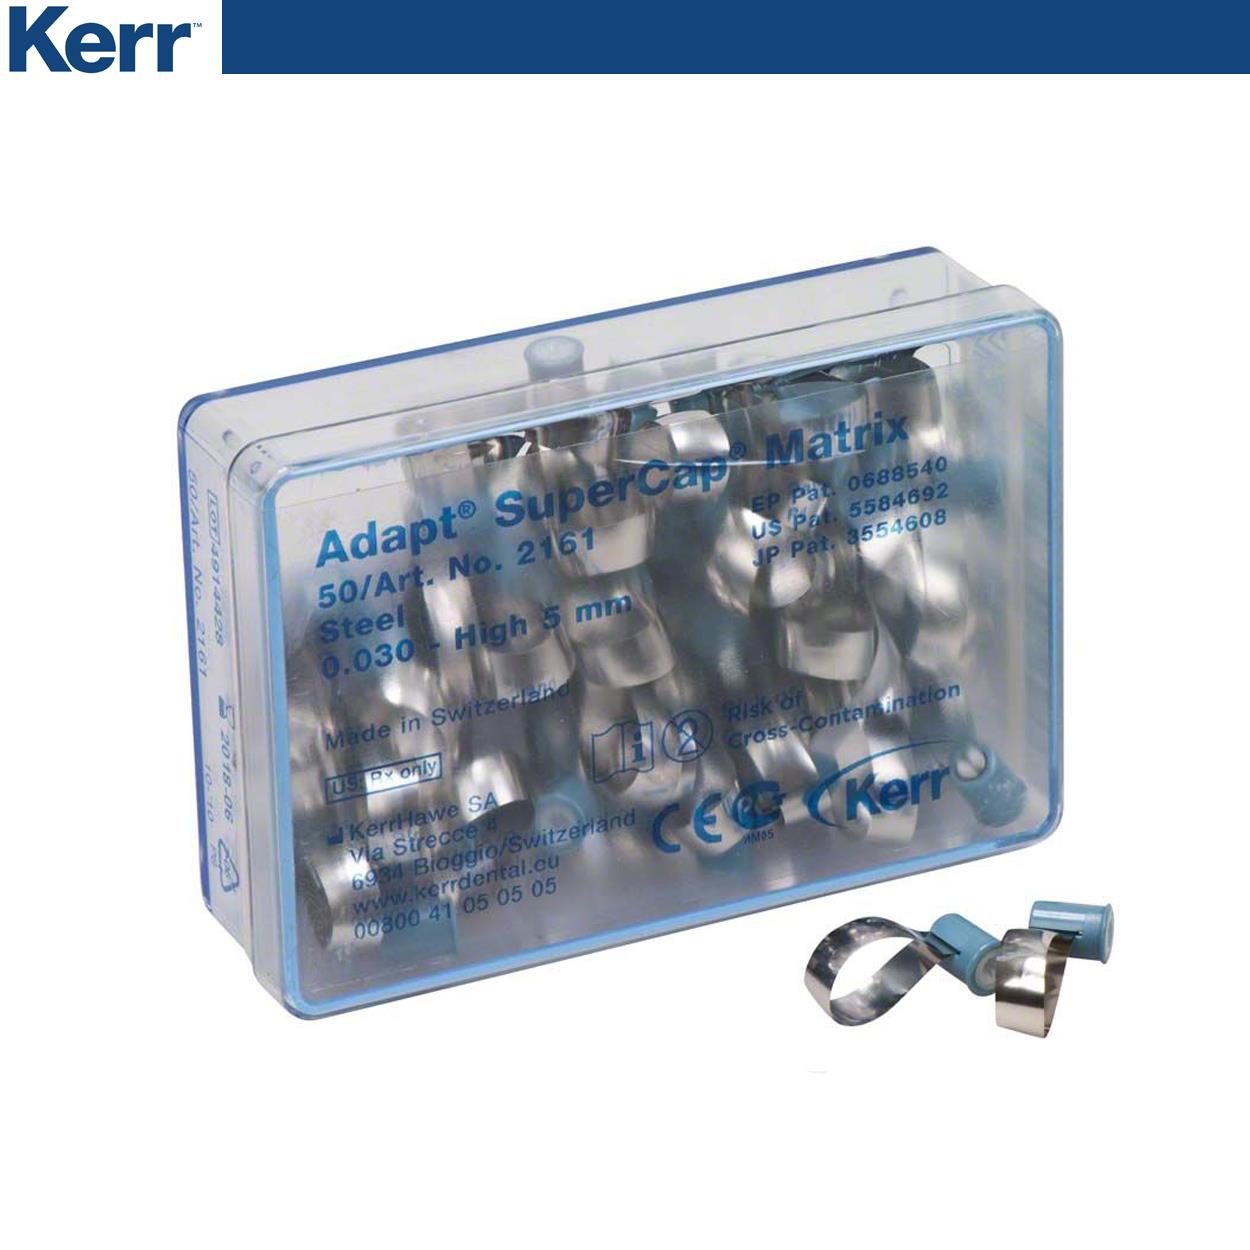 DentrealStore - Kerr Offer - SuperMat Adapt SuperCap Matrices - Supermat Gun gift with Purchase of 10 Boxes